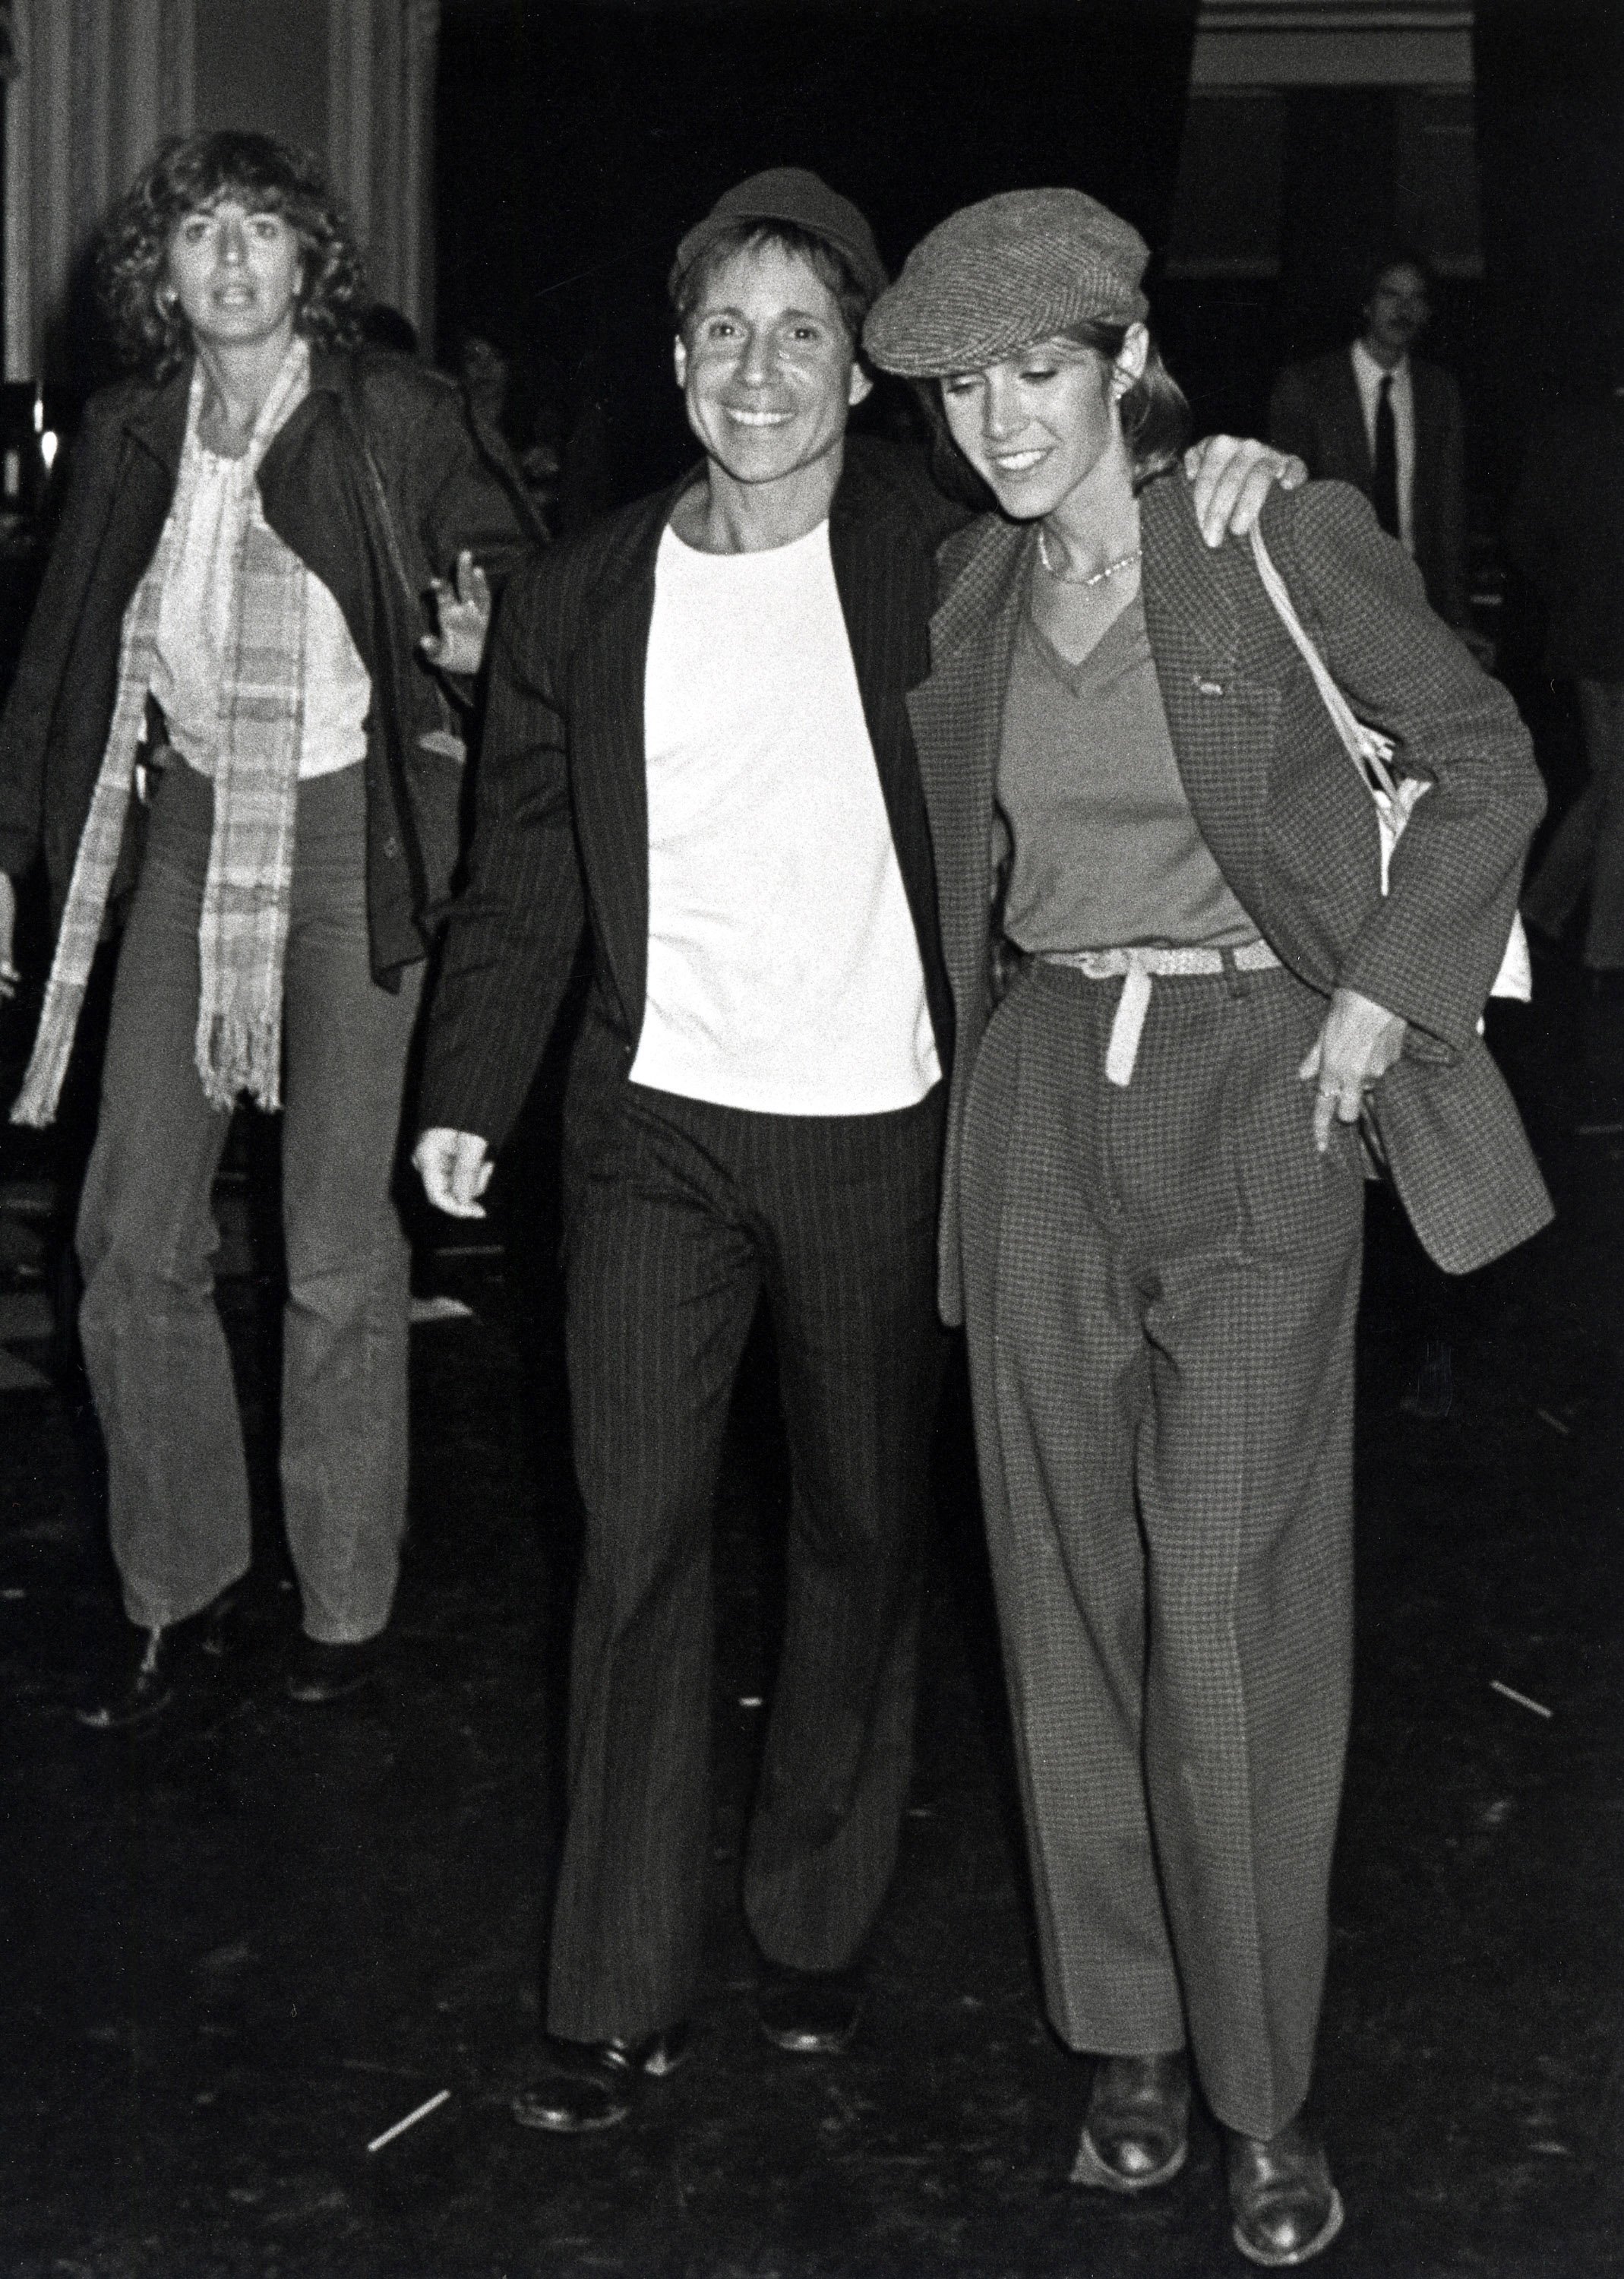 (L to R): Penny Marshall, Paul Simon, and Carrie Fisher in New York City